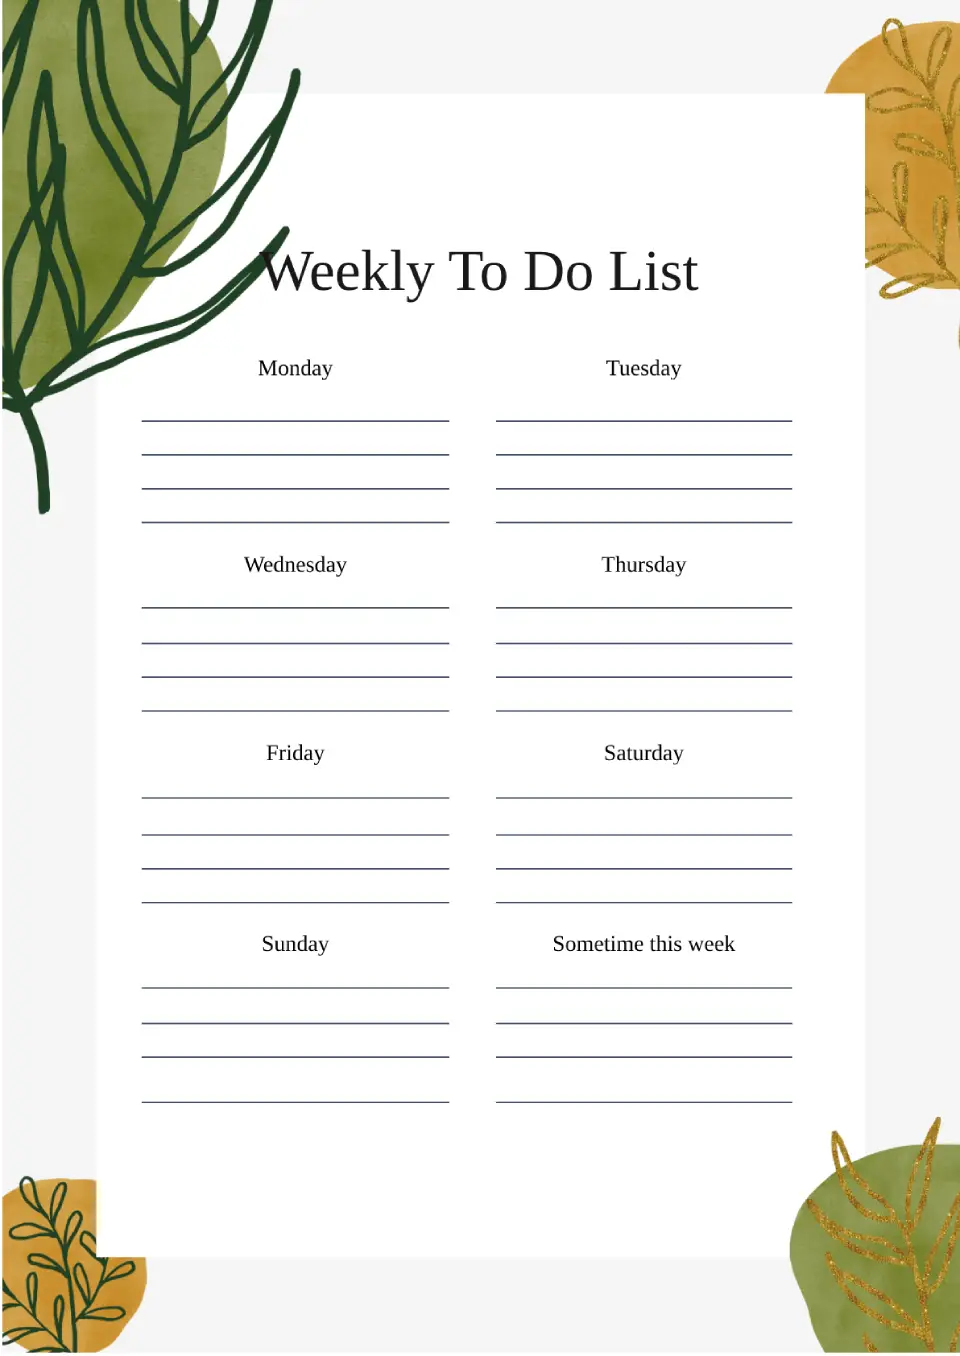 Weekly To Do List Template for Google Docs